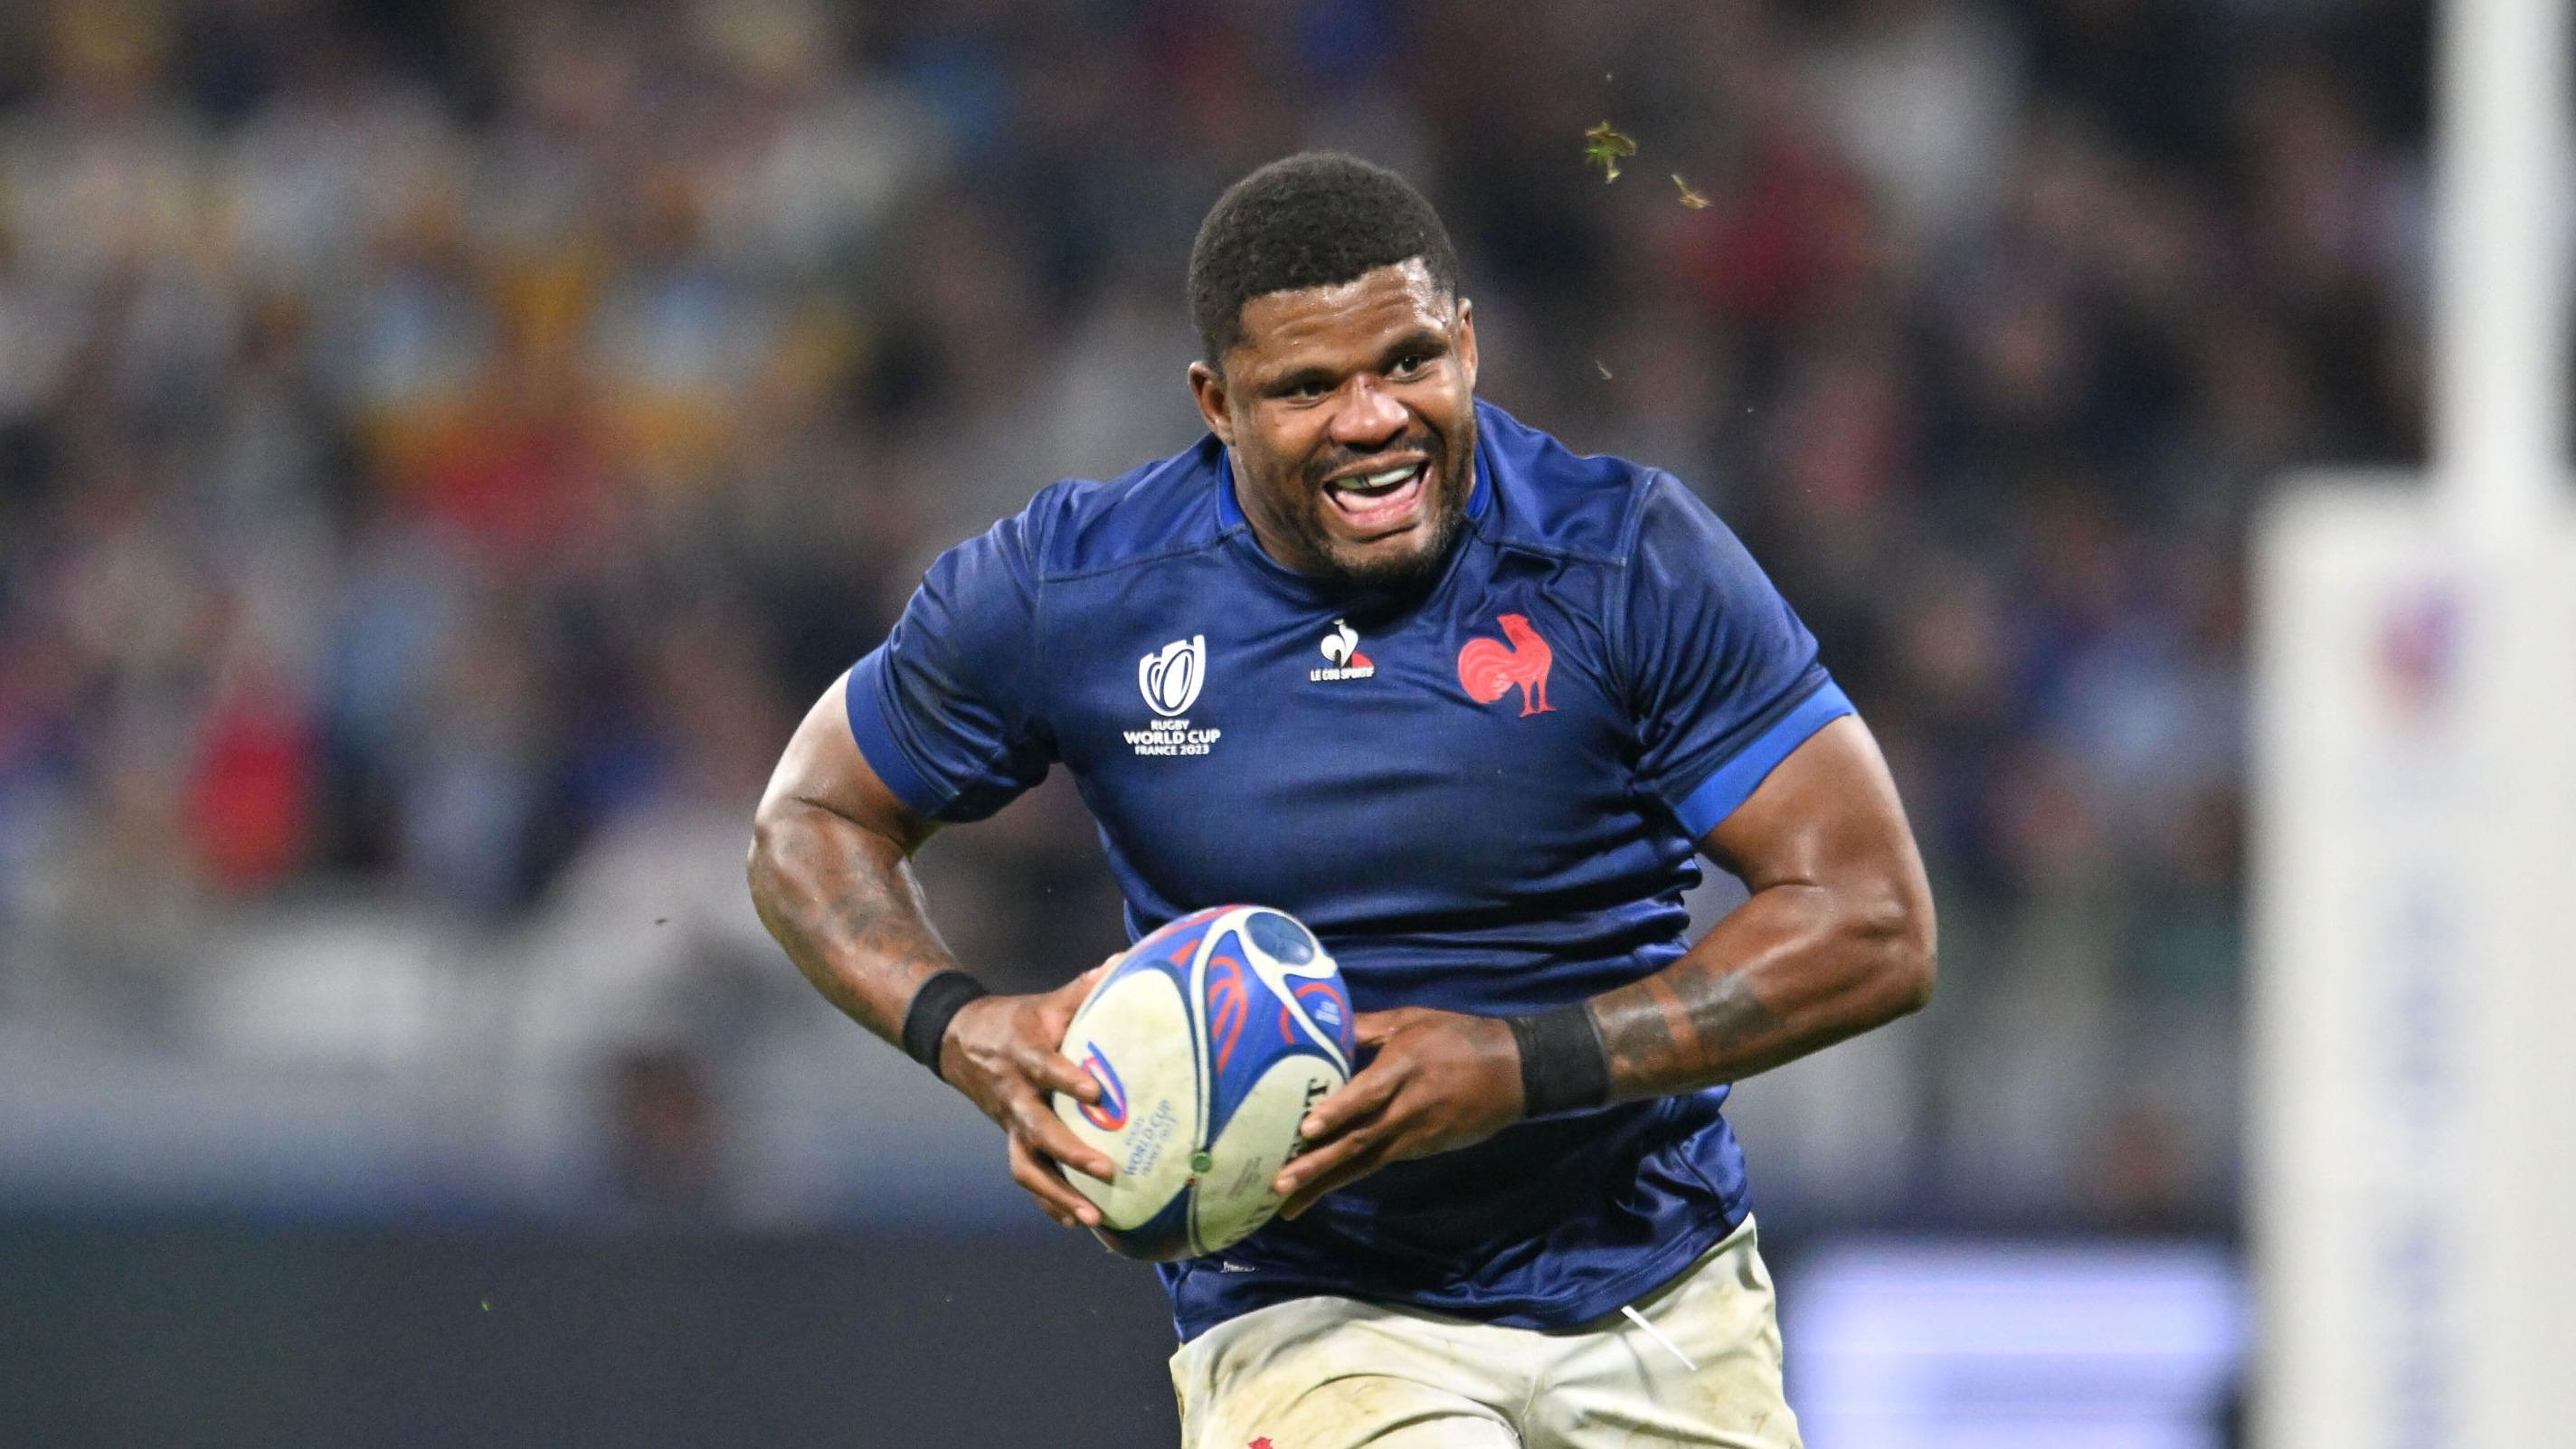 XV of France: “I think we will be there against Ireland”, announces Danty